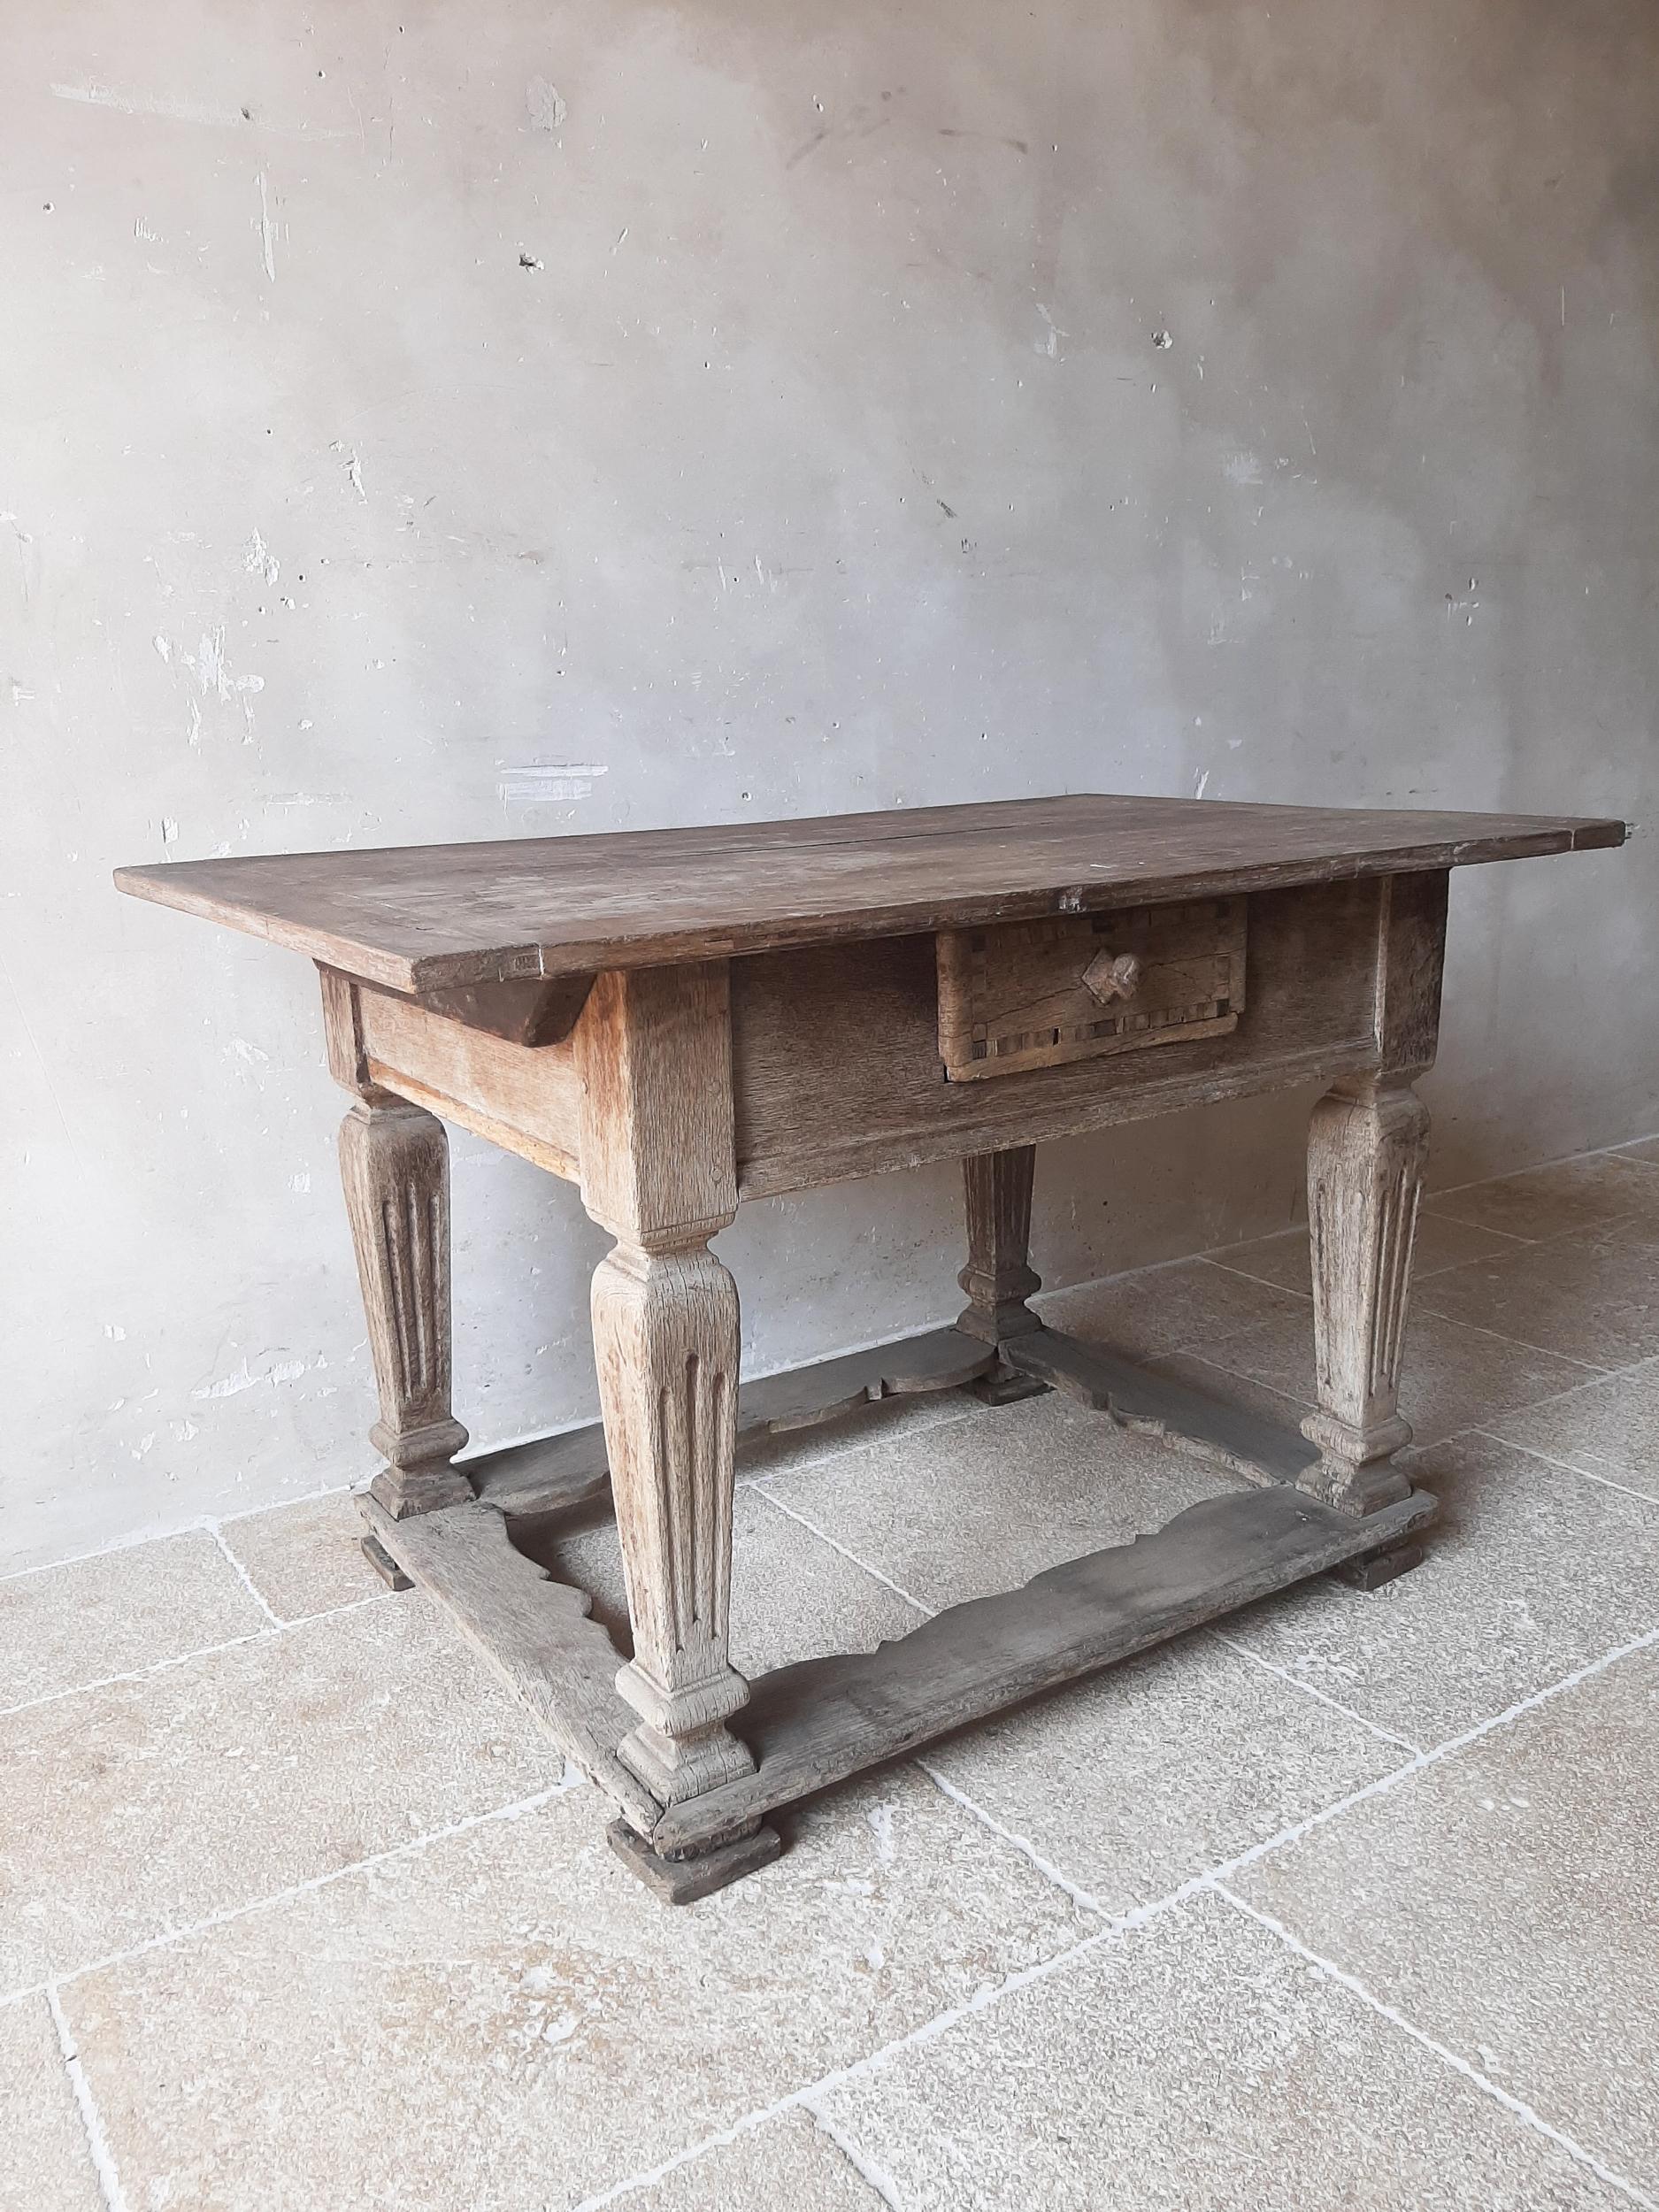 17th century oak Dutch pay table with balluster-shaped legs, partly fluted with lines with accolade motif in between. On the drawer an inlaid walnut edge. The oak is beautiful white with a gray tint (not sandblasted). Dutch Renaissance